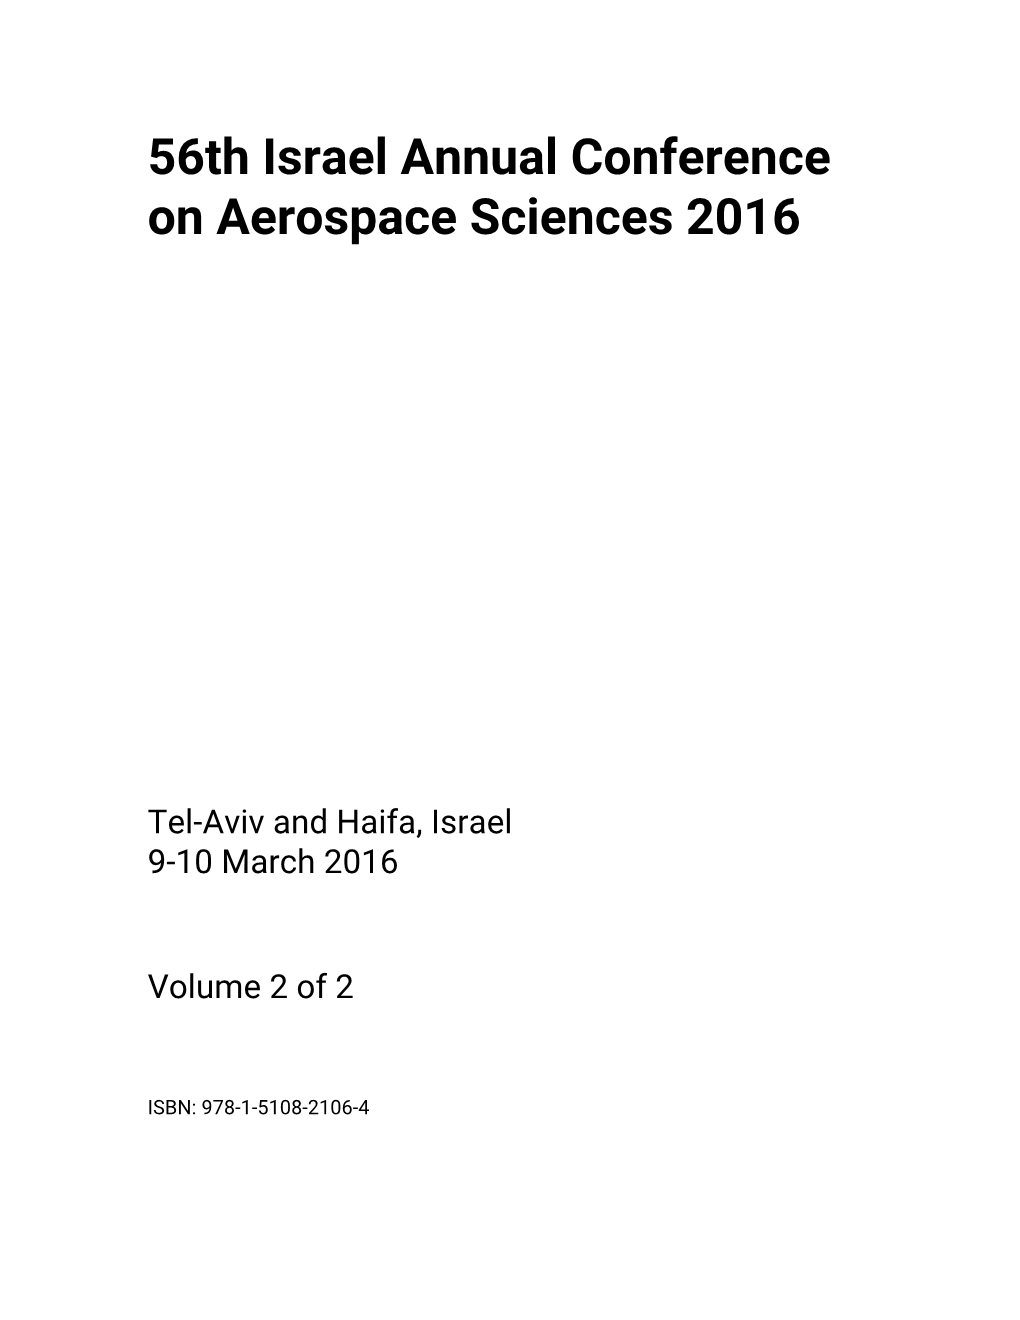 56Th Israel Annual Conference on Aerospace Sciences 2016